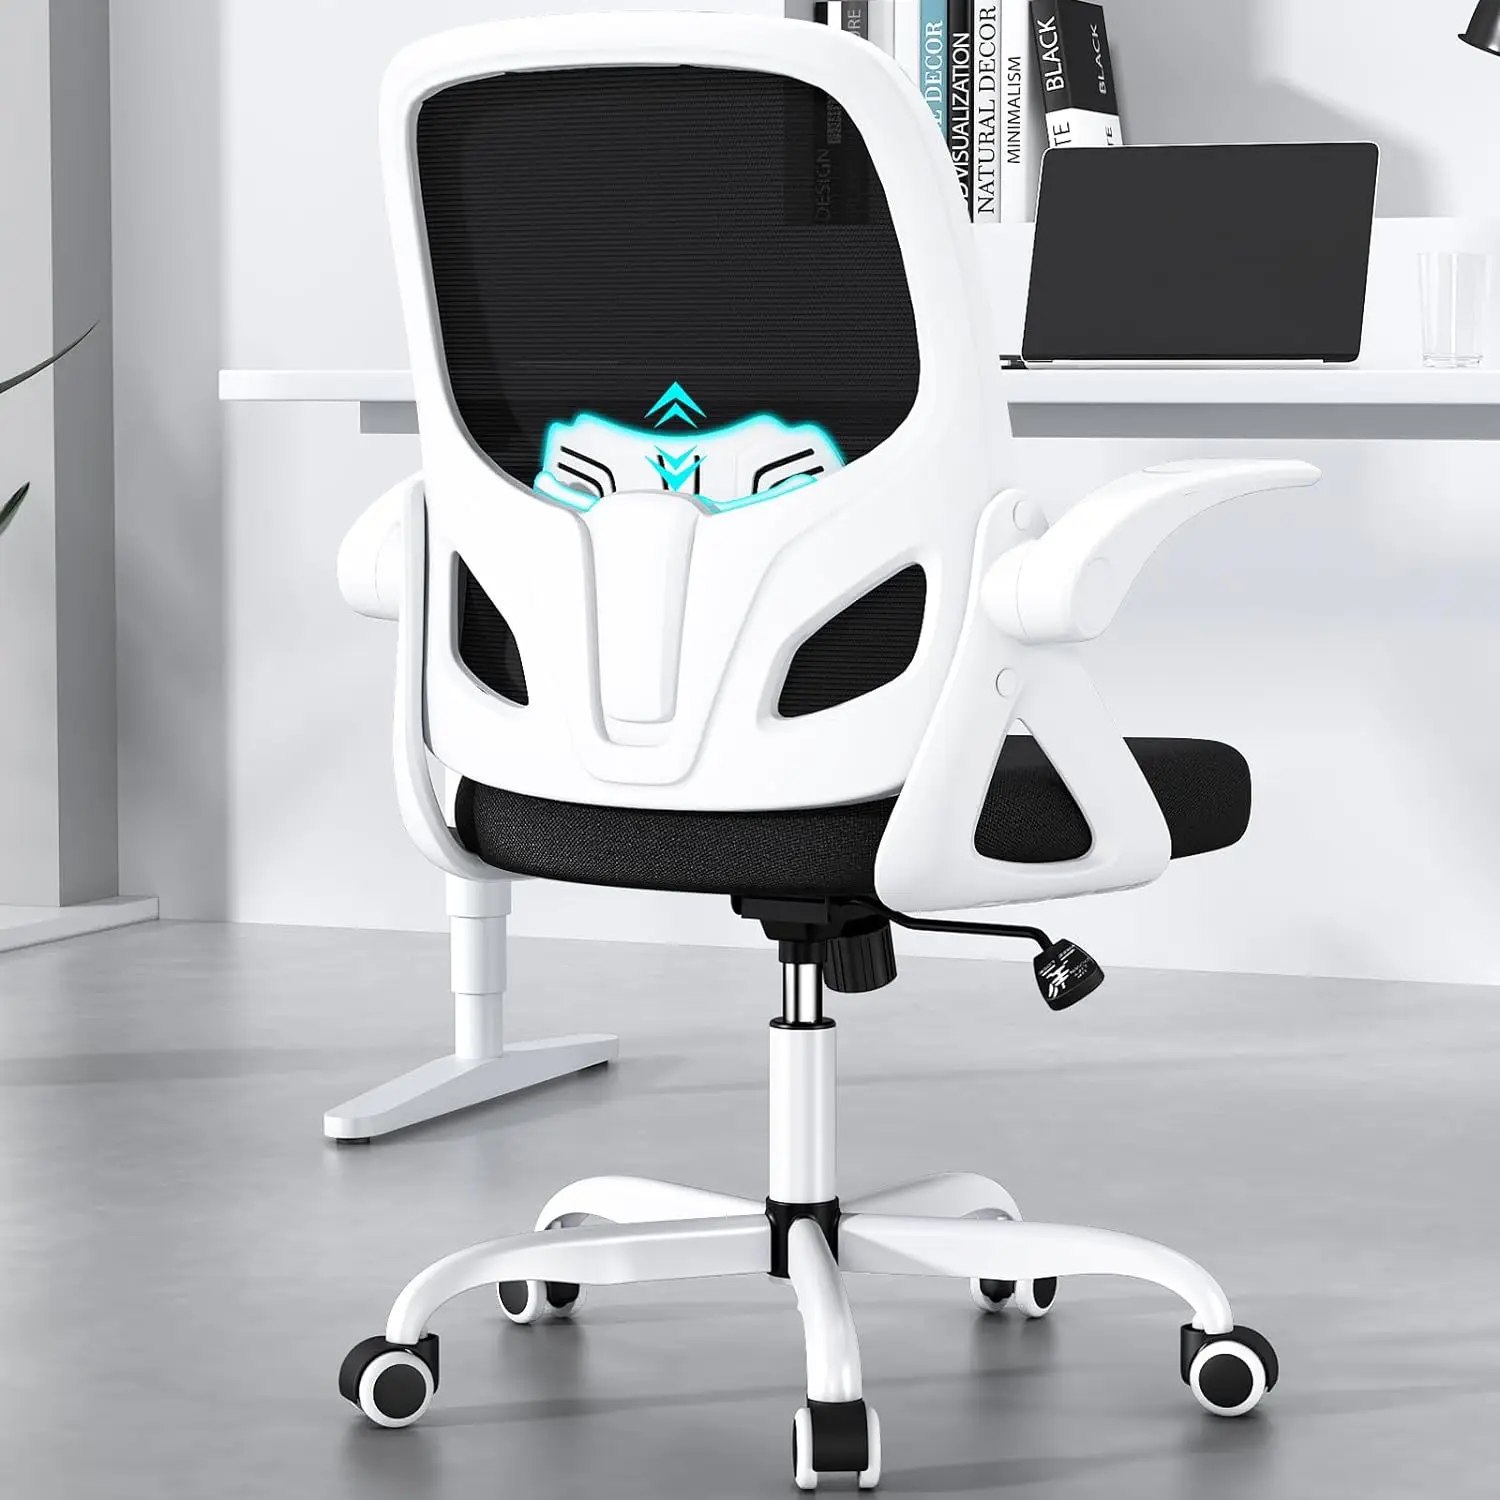 Office Desk Chair with Lumbar Support Ergonomic Mesh Office Chair with Wheels and Flip-up Armrests Adjustable Height Swivel Comp gongbei 7 plc hmi all in one comes with 4 analog inputs and 2 analog outputs comp atible with siemens smart s7 200 plc s7 v4 0